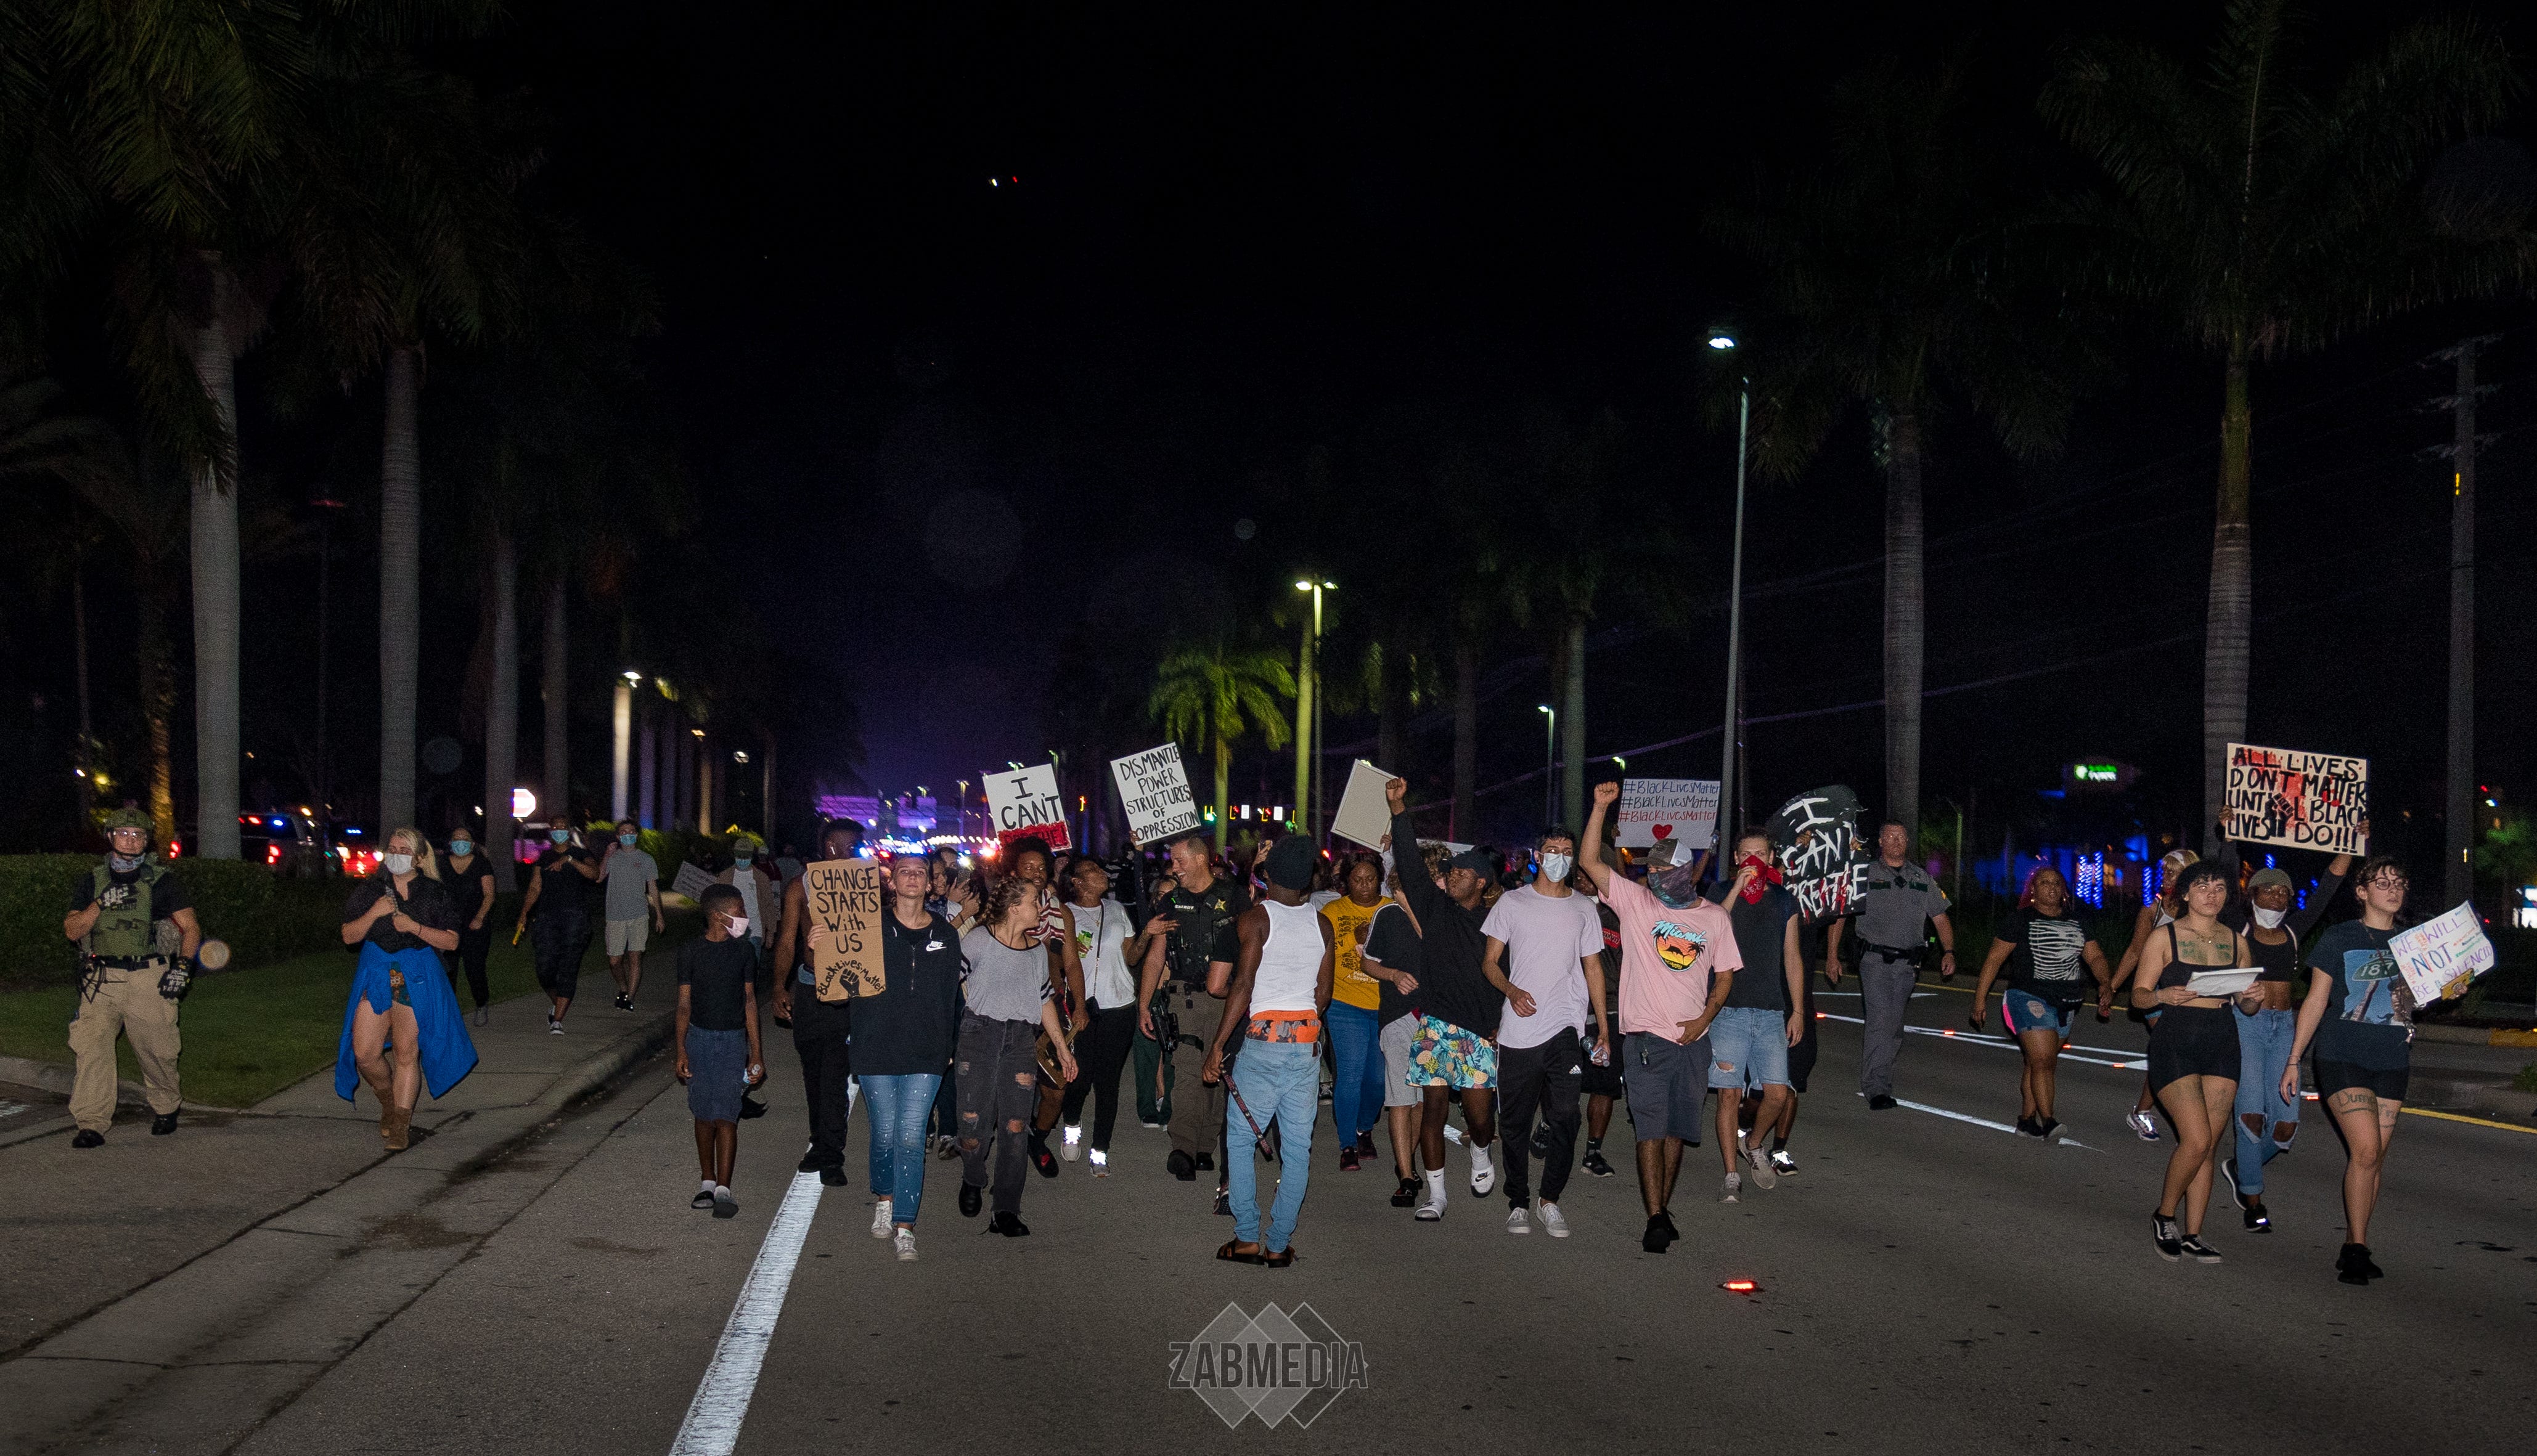 Collier sheriff's Cpl. Dan McCoy asked Lisa Martinez and Cherry Estelomme to walk alongside him at a June 1 protest in Naples, Florida. “If you guys make sure I don’t get jumped, I’ll walk with you.” 
“You’re not going to get jumped,” Cherry said. “We got you.”